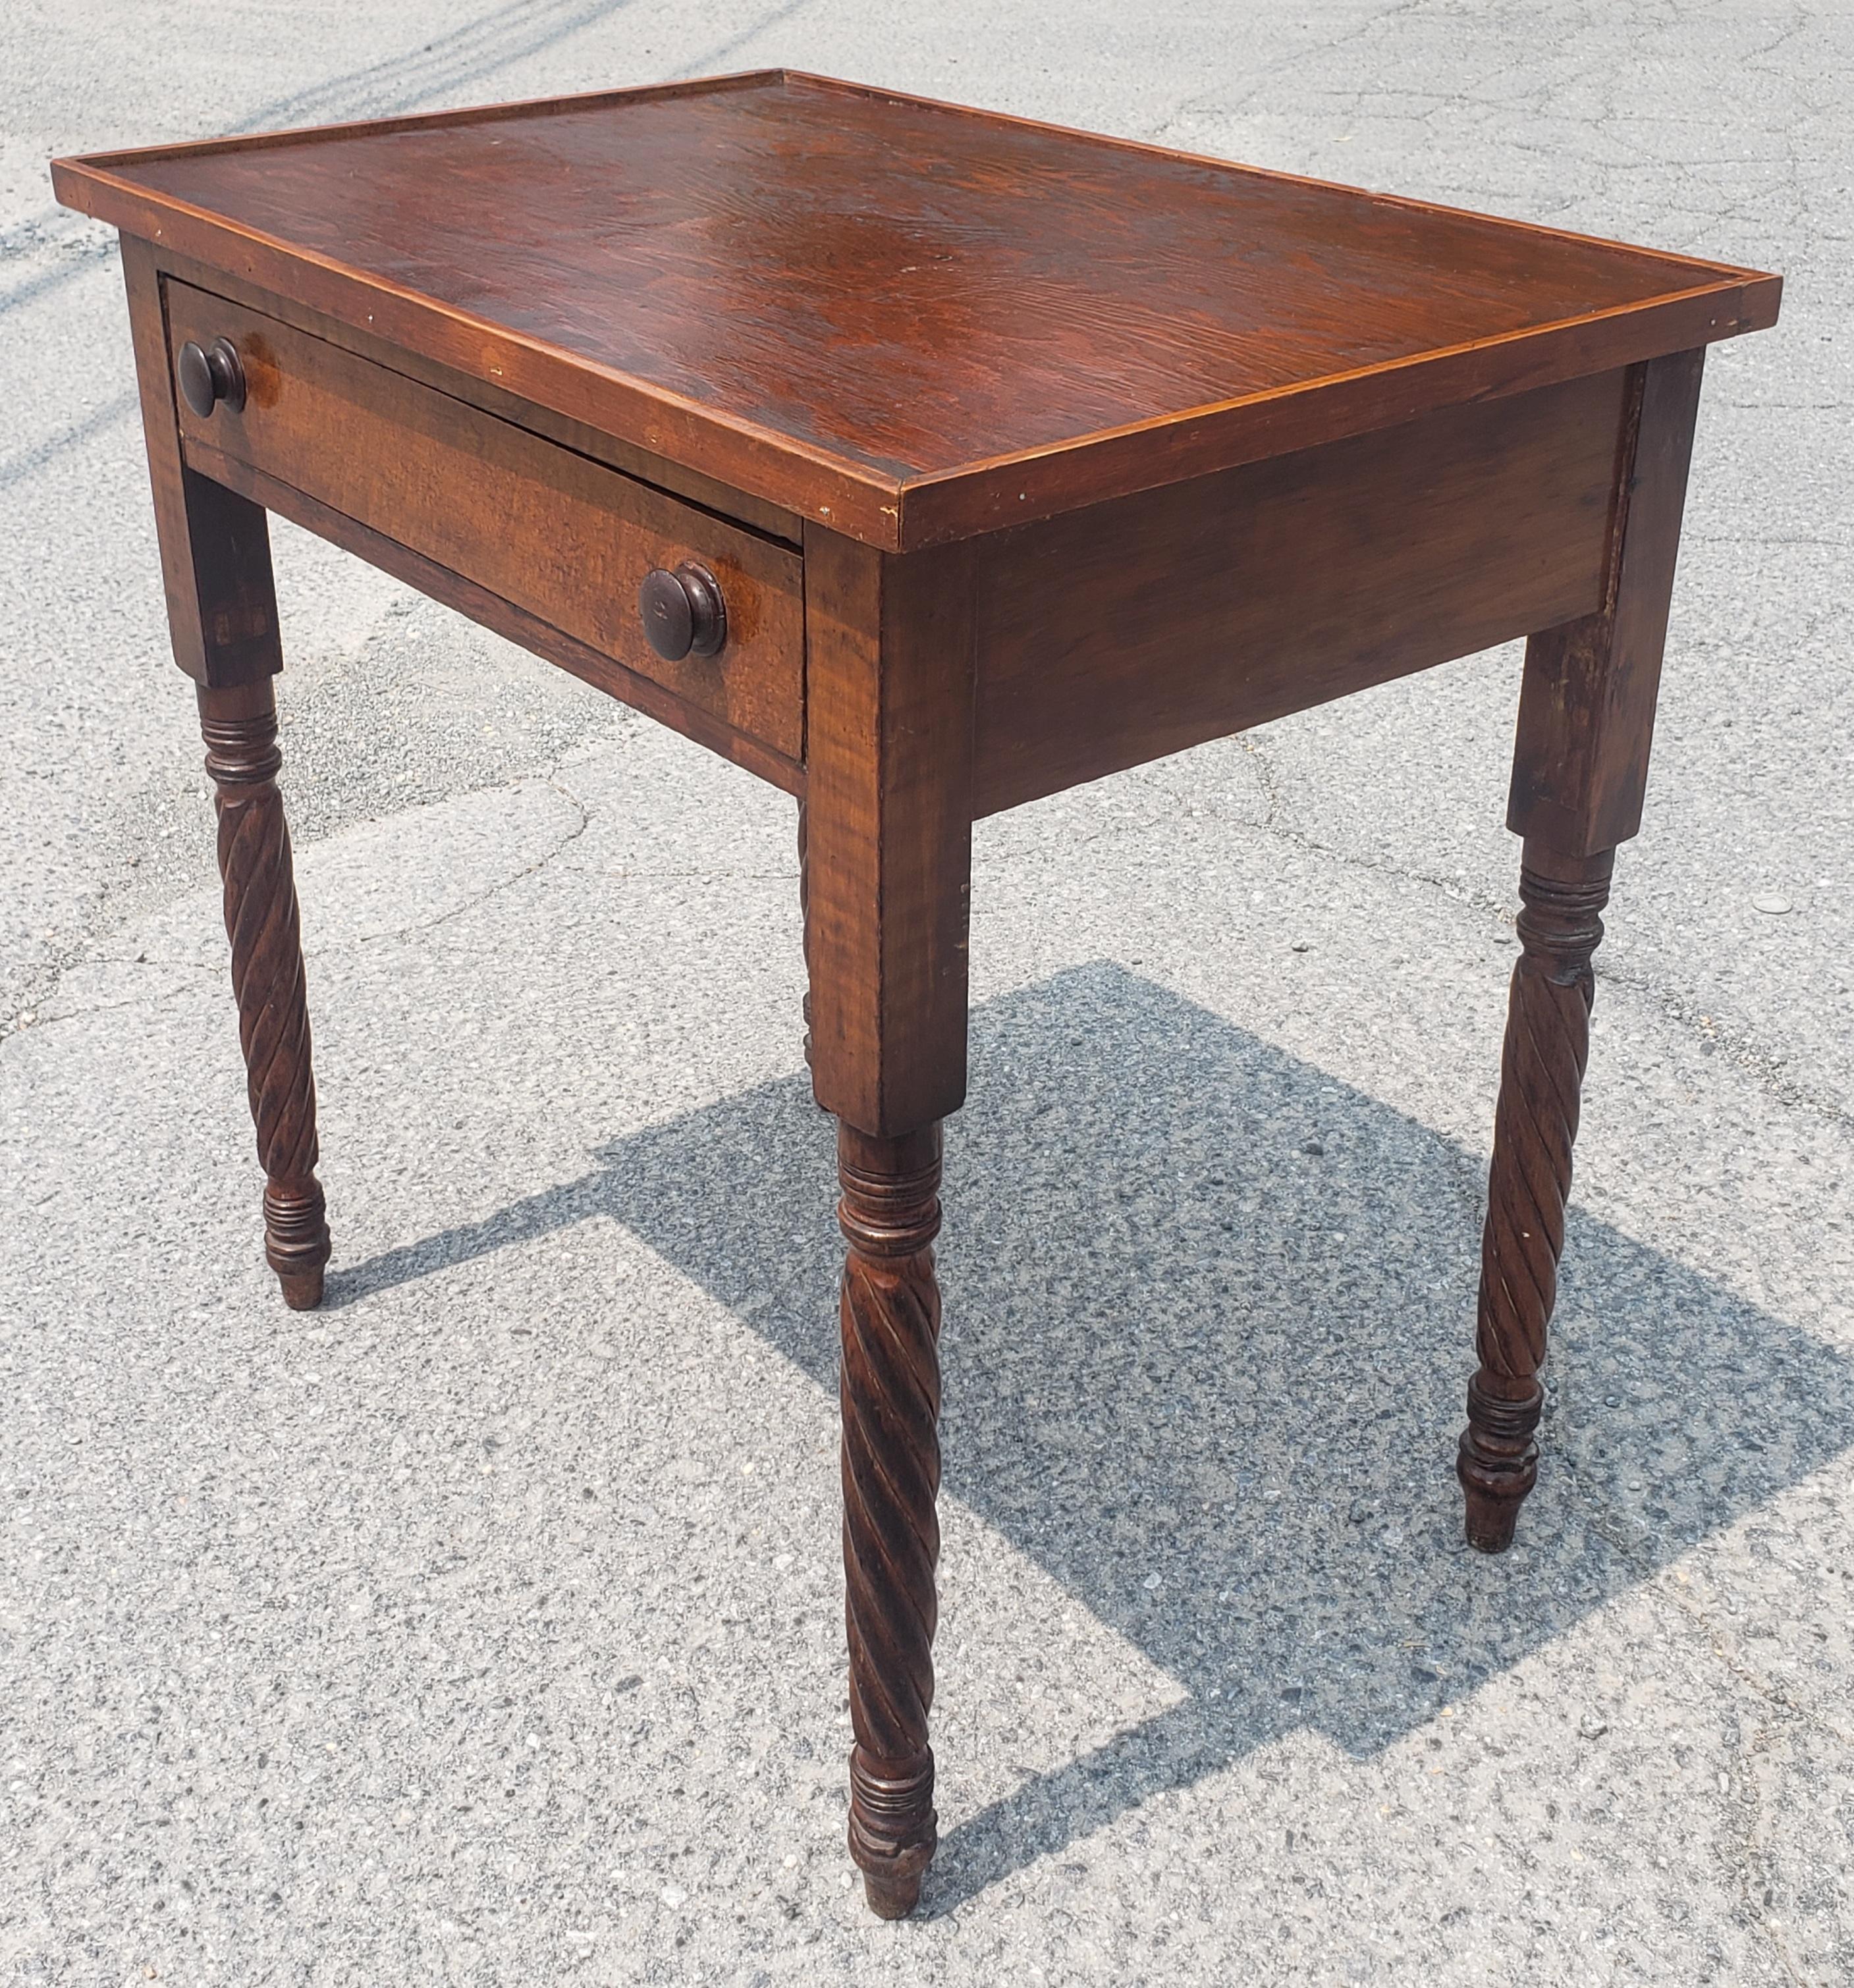 Early American Style Pine and Maple Spiral-Turned Leg Single Drawer Work Table For Sale 2